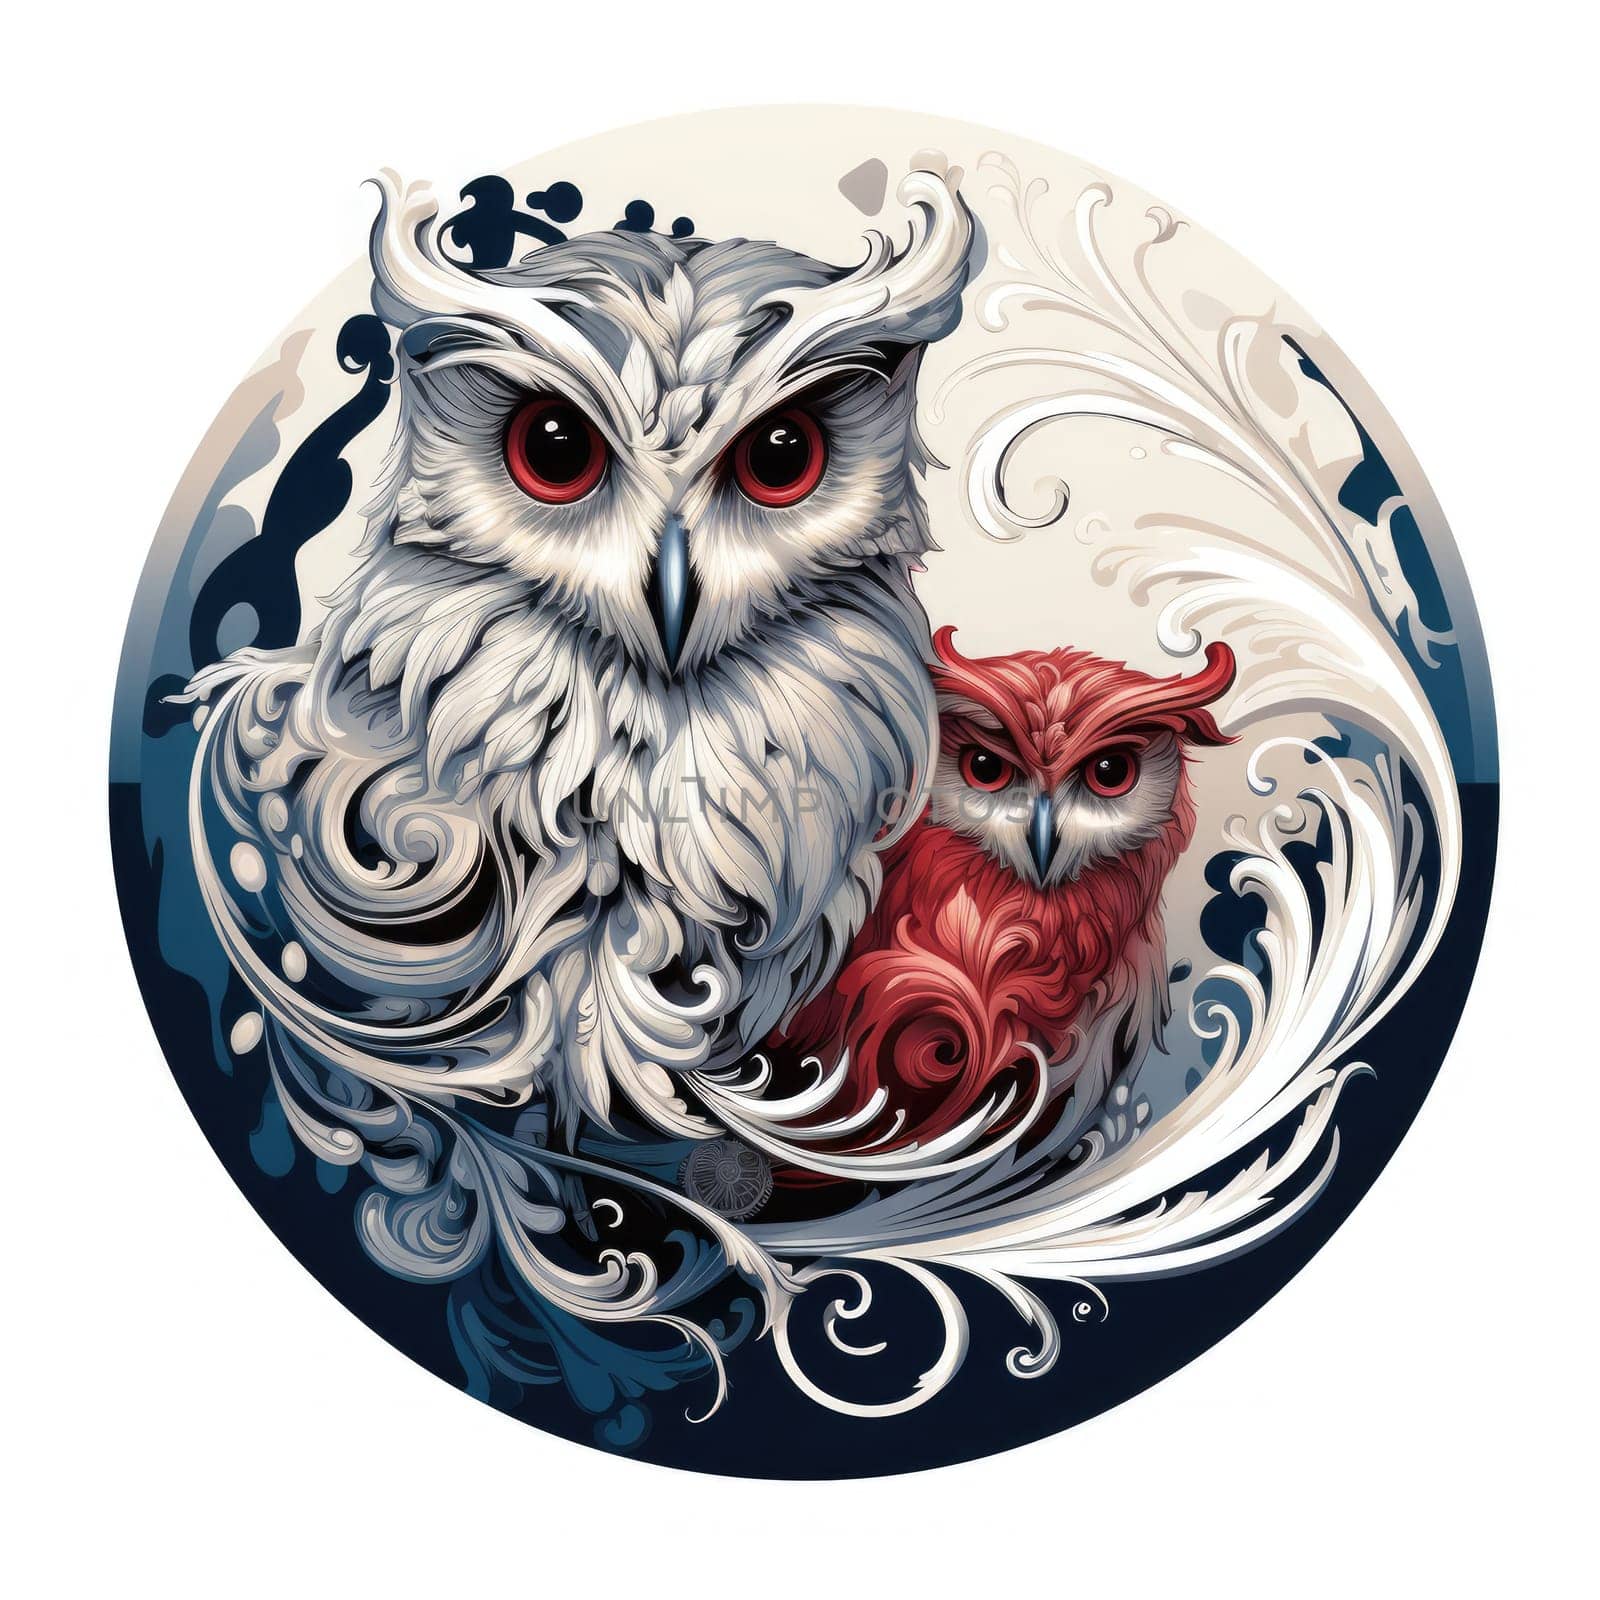 Illustration of an owl in a decorative art style. by palinchak